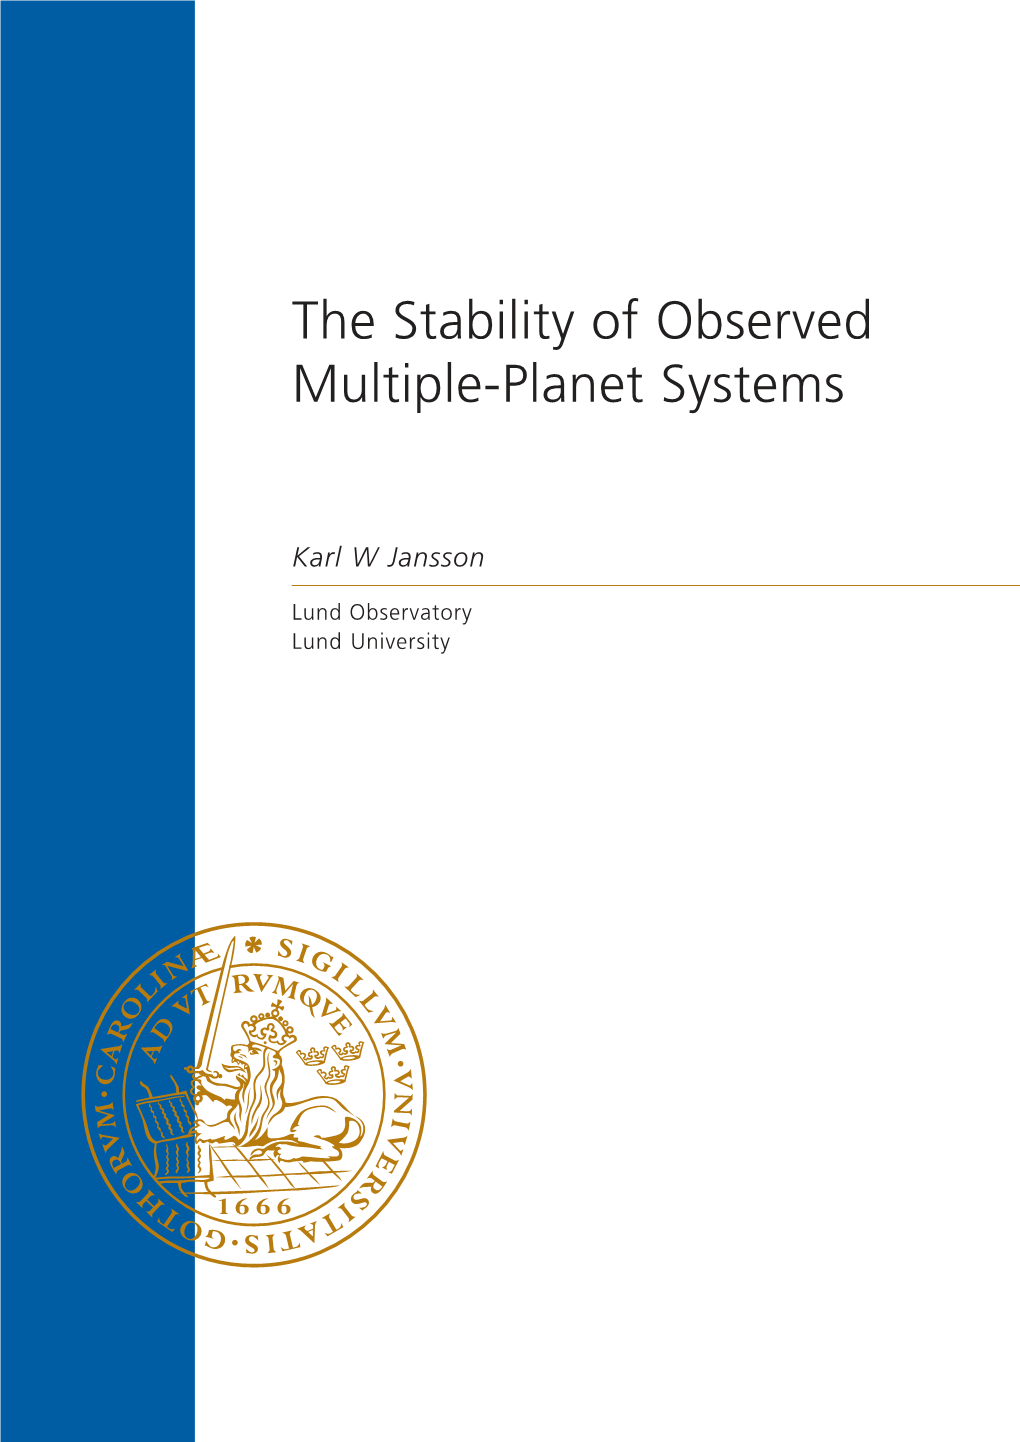 The Stability of Observed Multiple-Planet Systems